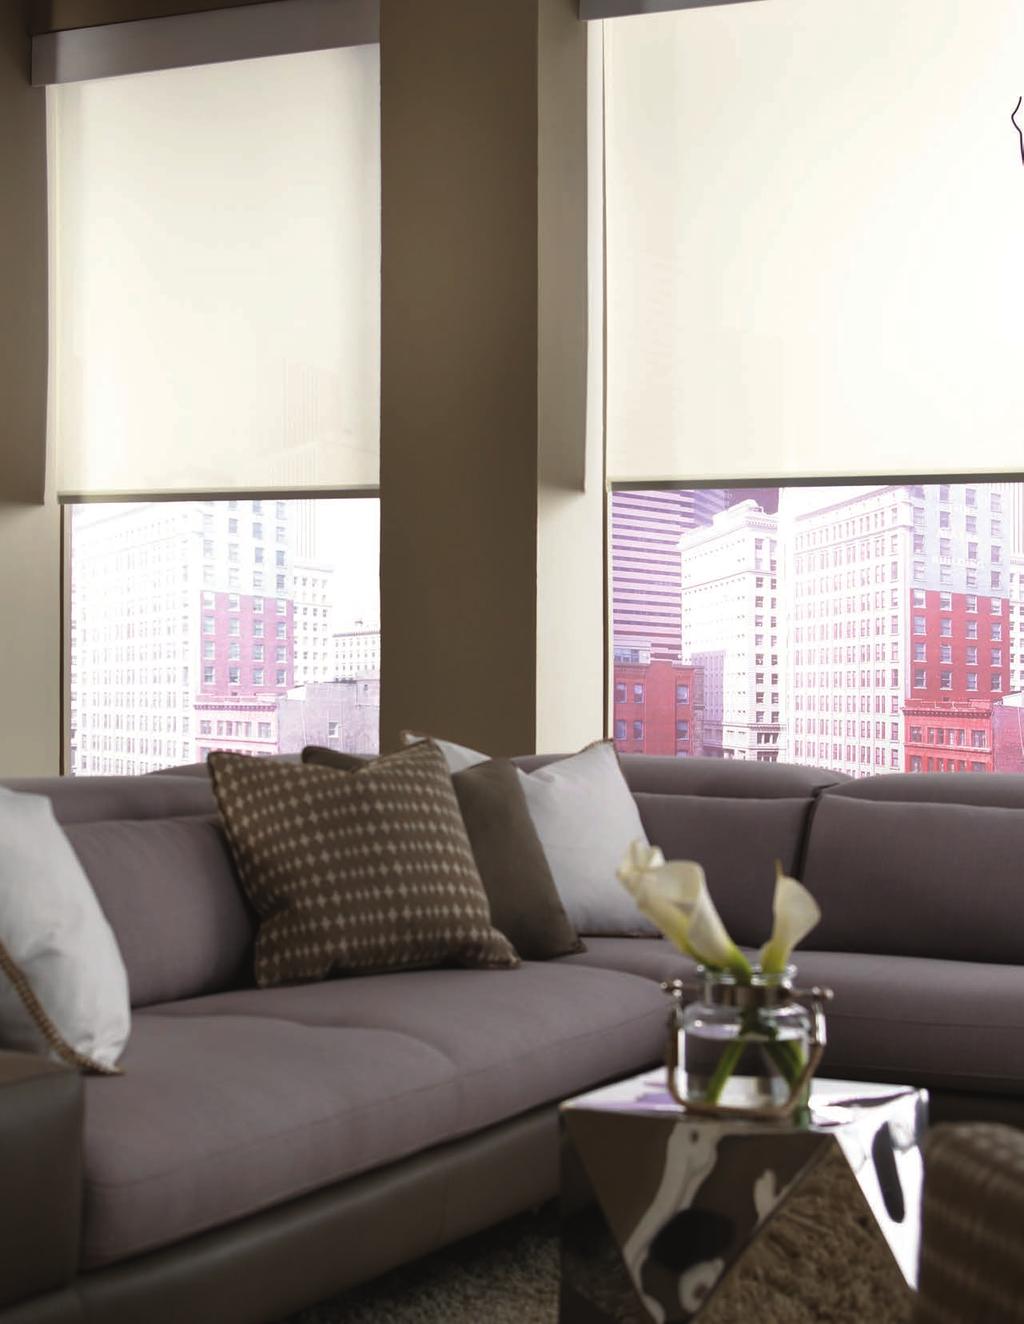 Roller shades in Basketweave 90 fabric, Charcoal, from The ClassicoTM Collection